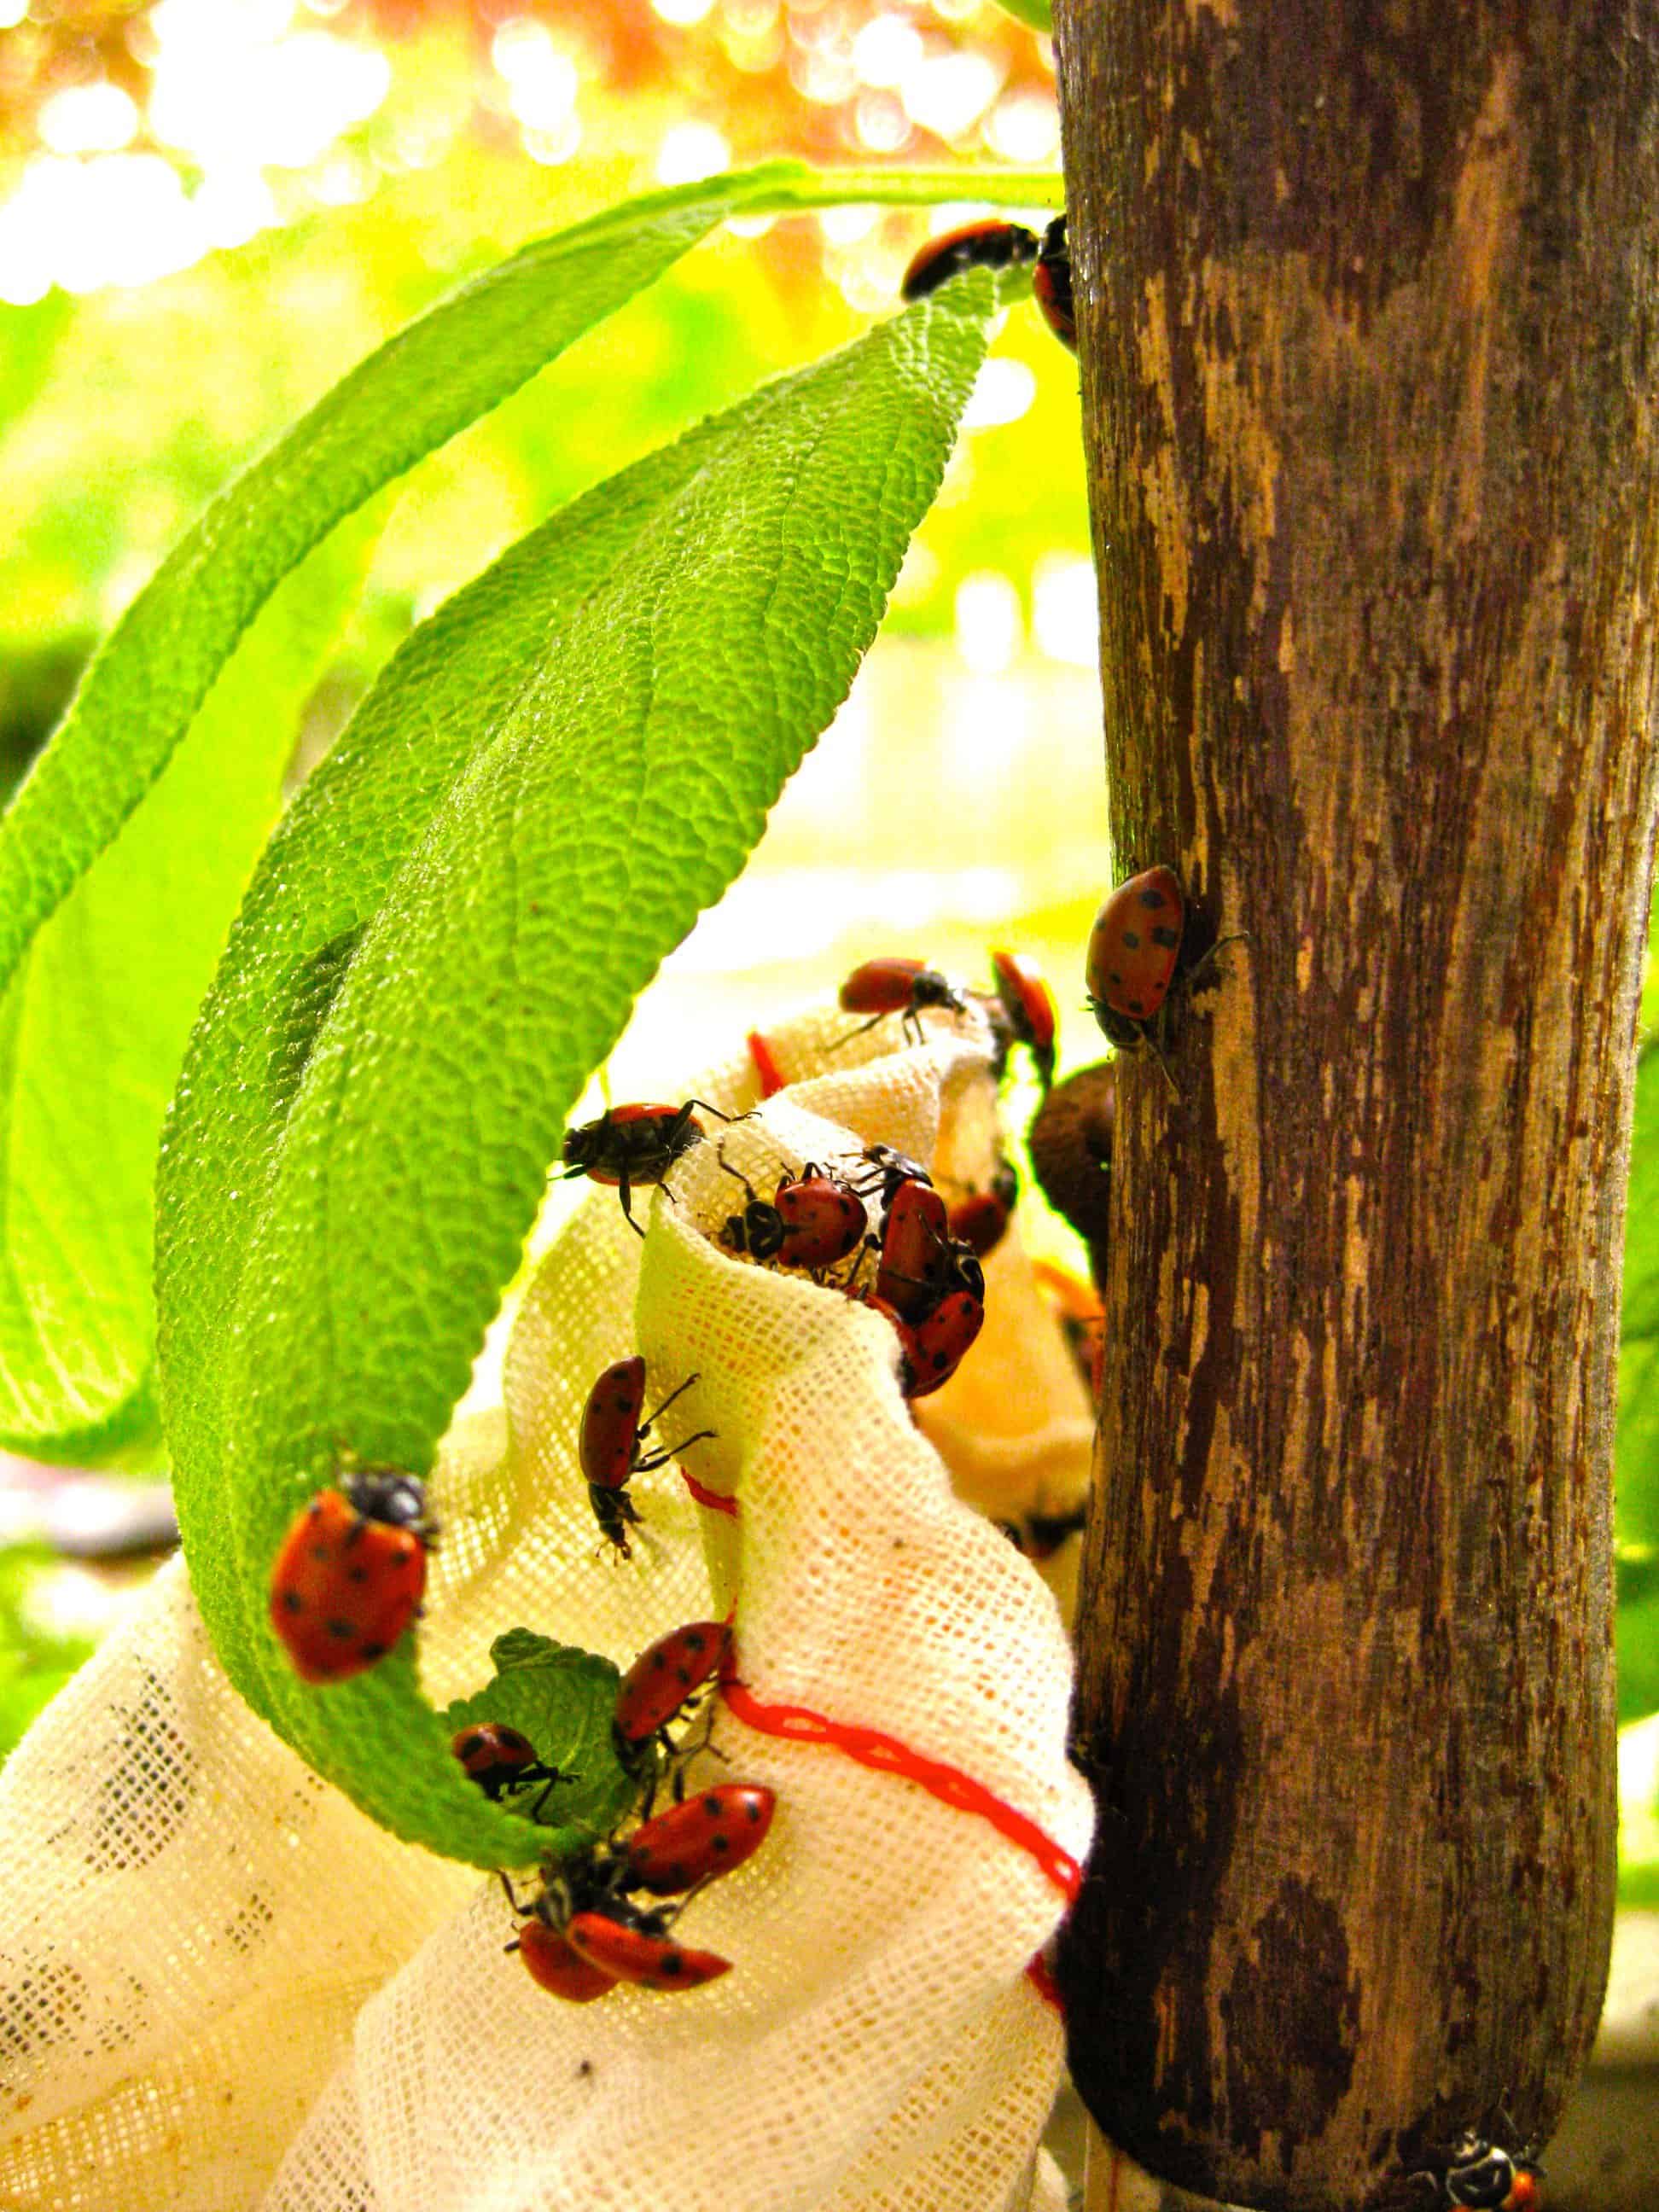 Ladybugs emerge from their muslim bag and begin to climb green leaves.